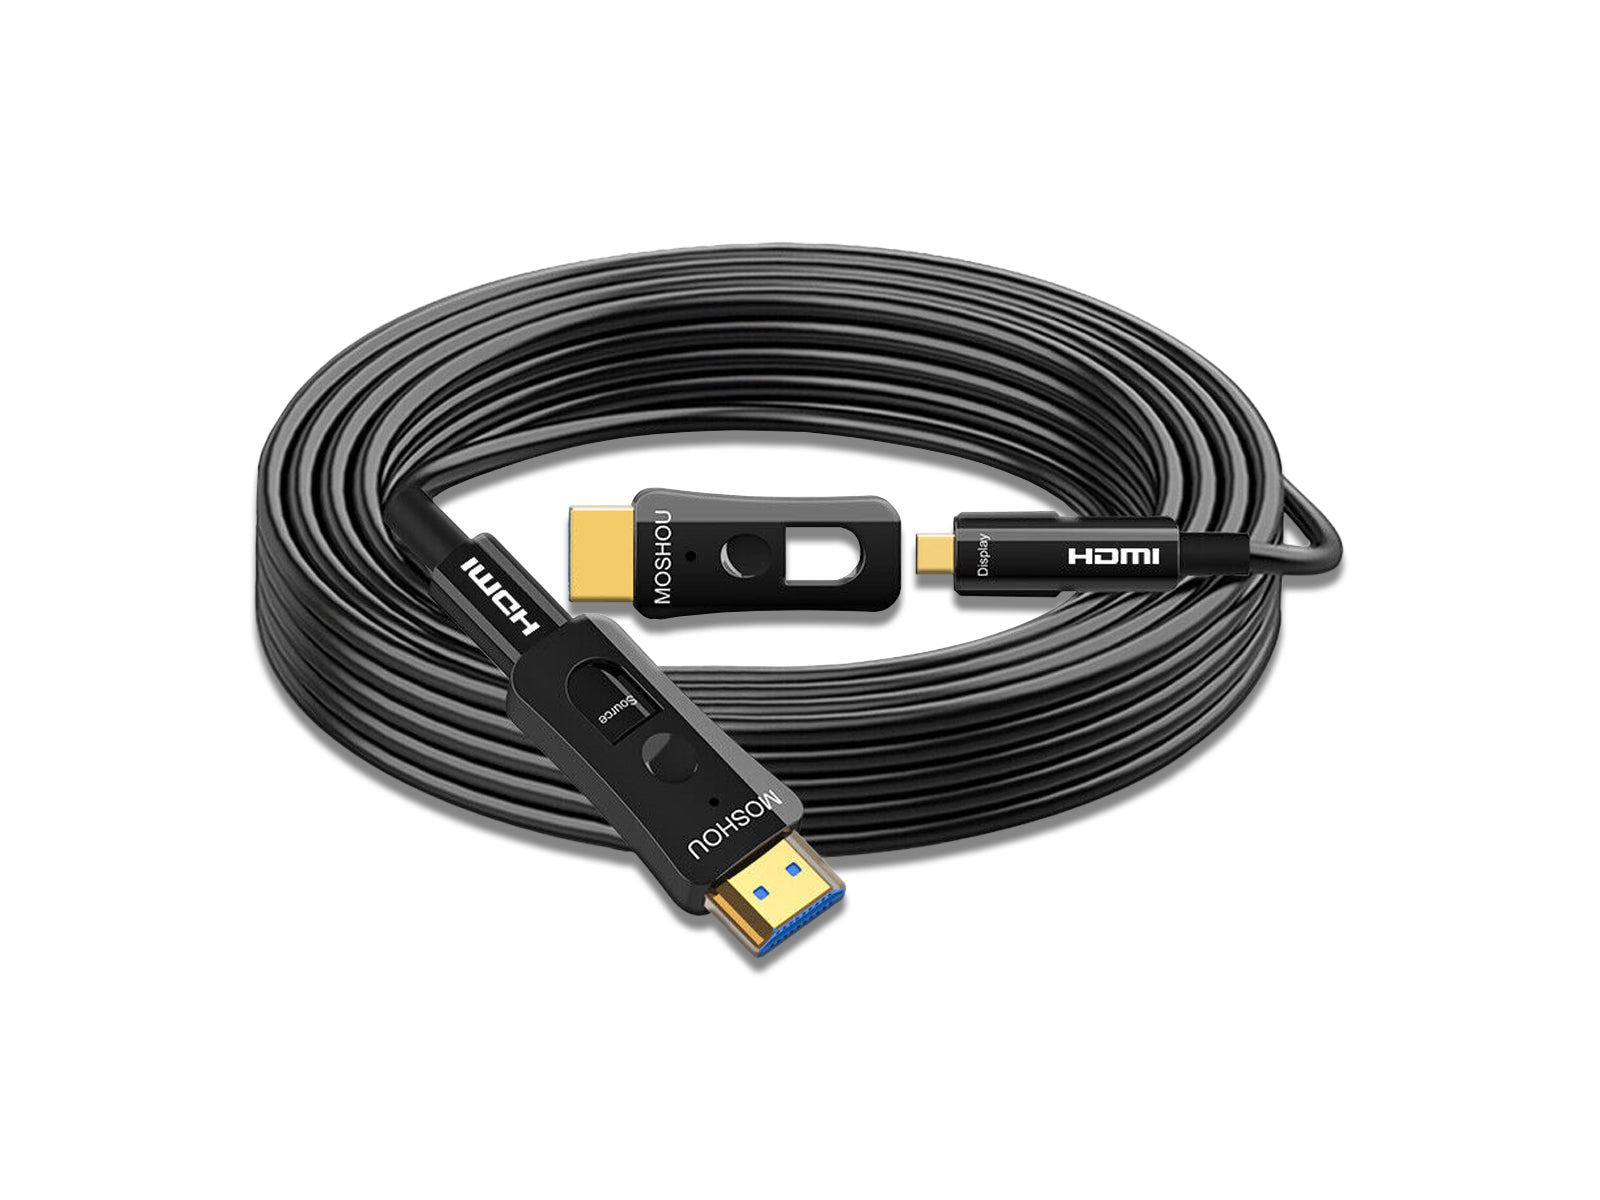 4K HDMI Fibre Optic Cable & amp Extender Rolled Up